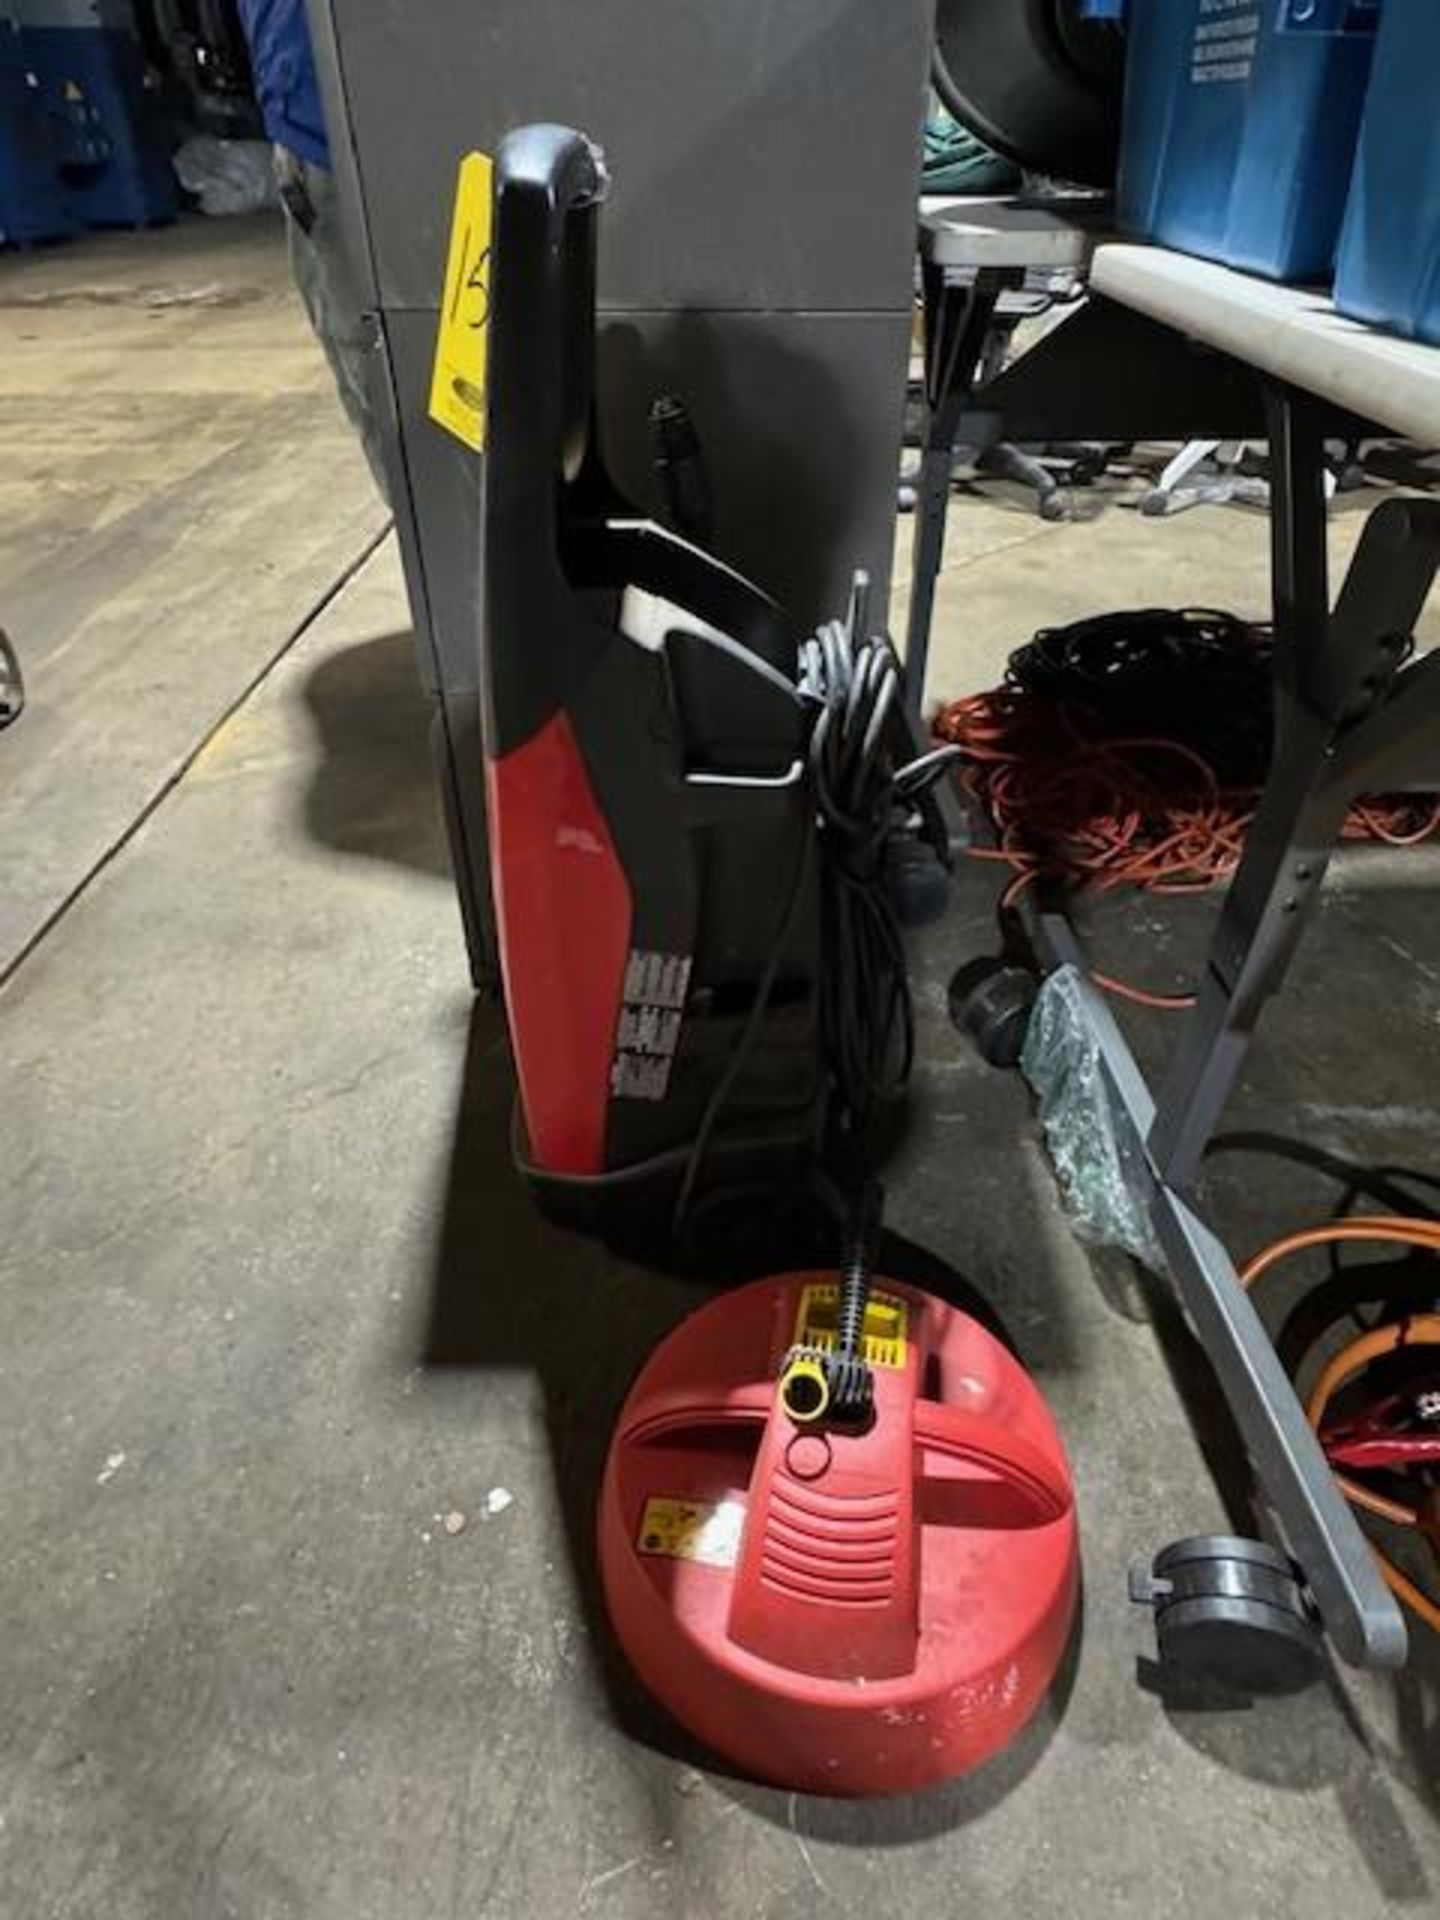 HUSKY ELECTRIC POWER WASHER, 1750 PSI, MISSING WAND AND SCRUBBING HEAD (Located in Southampton, PA) - Image 3 of 3